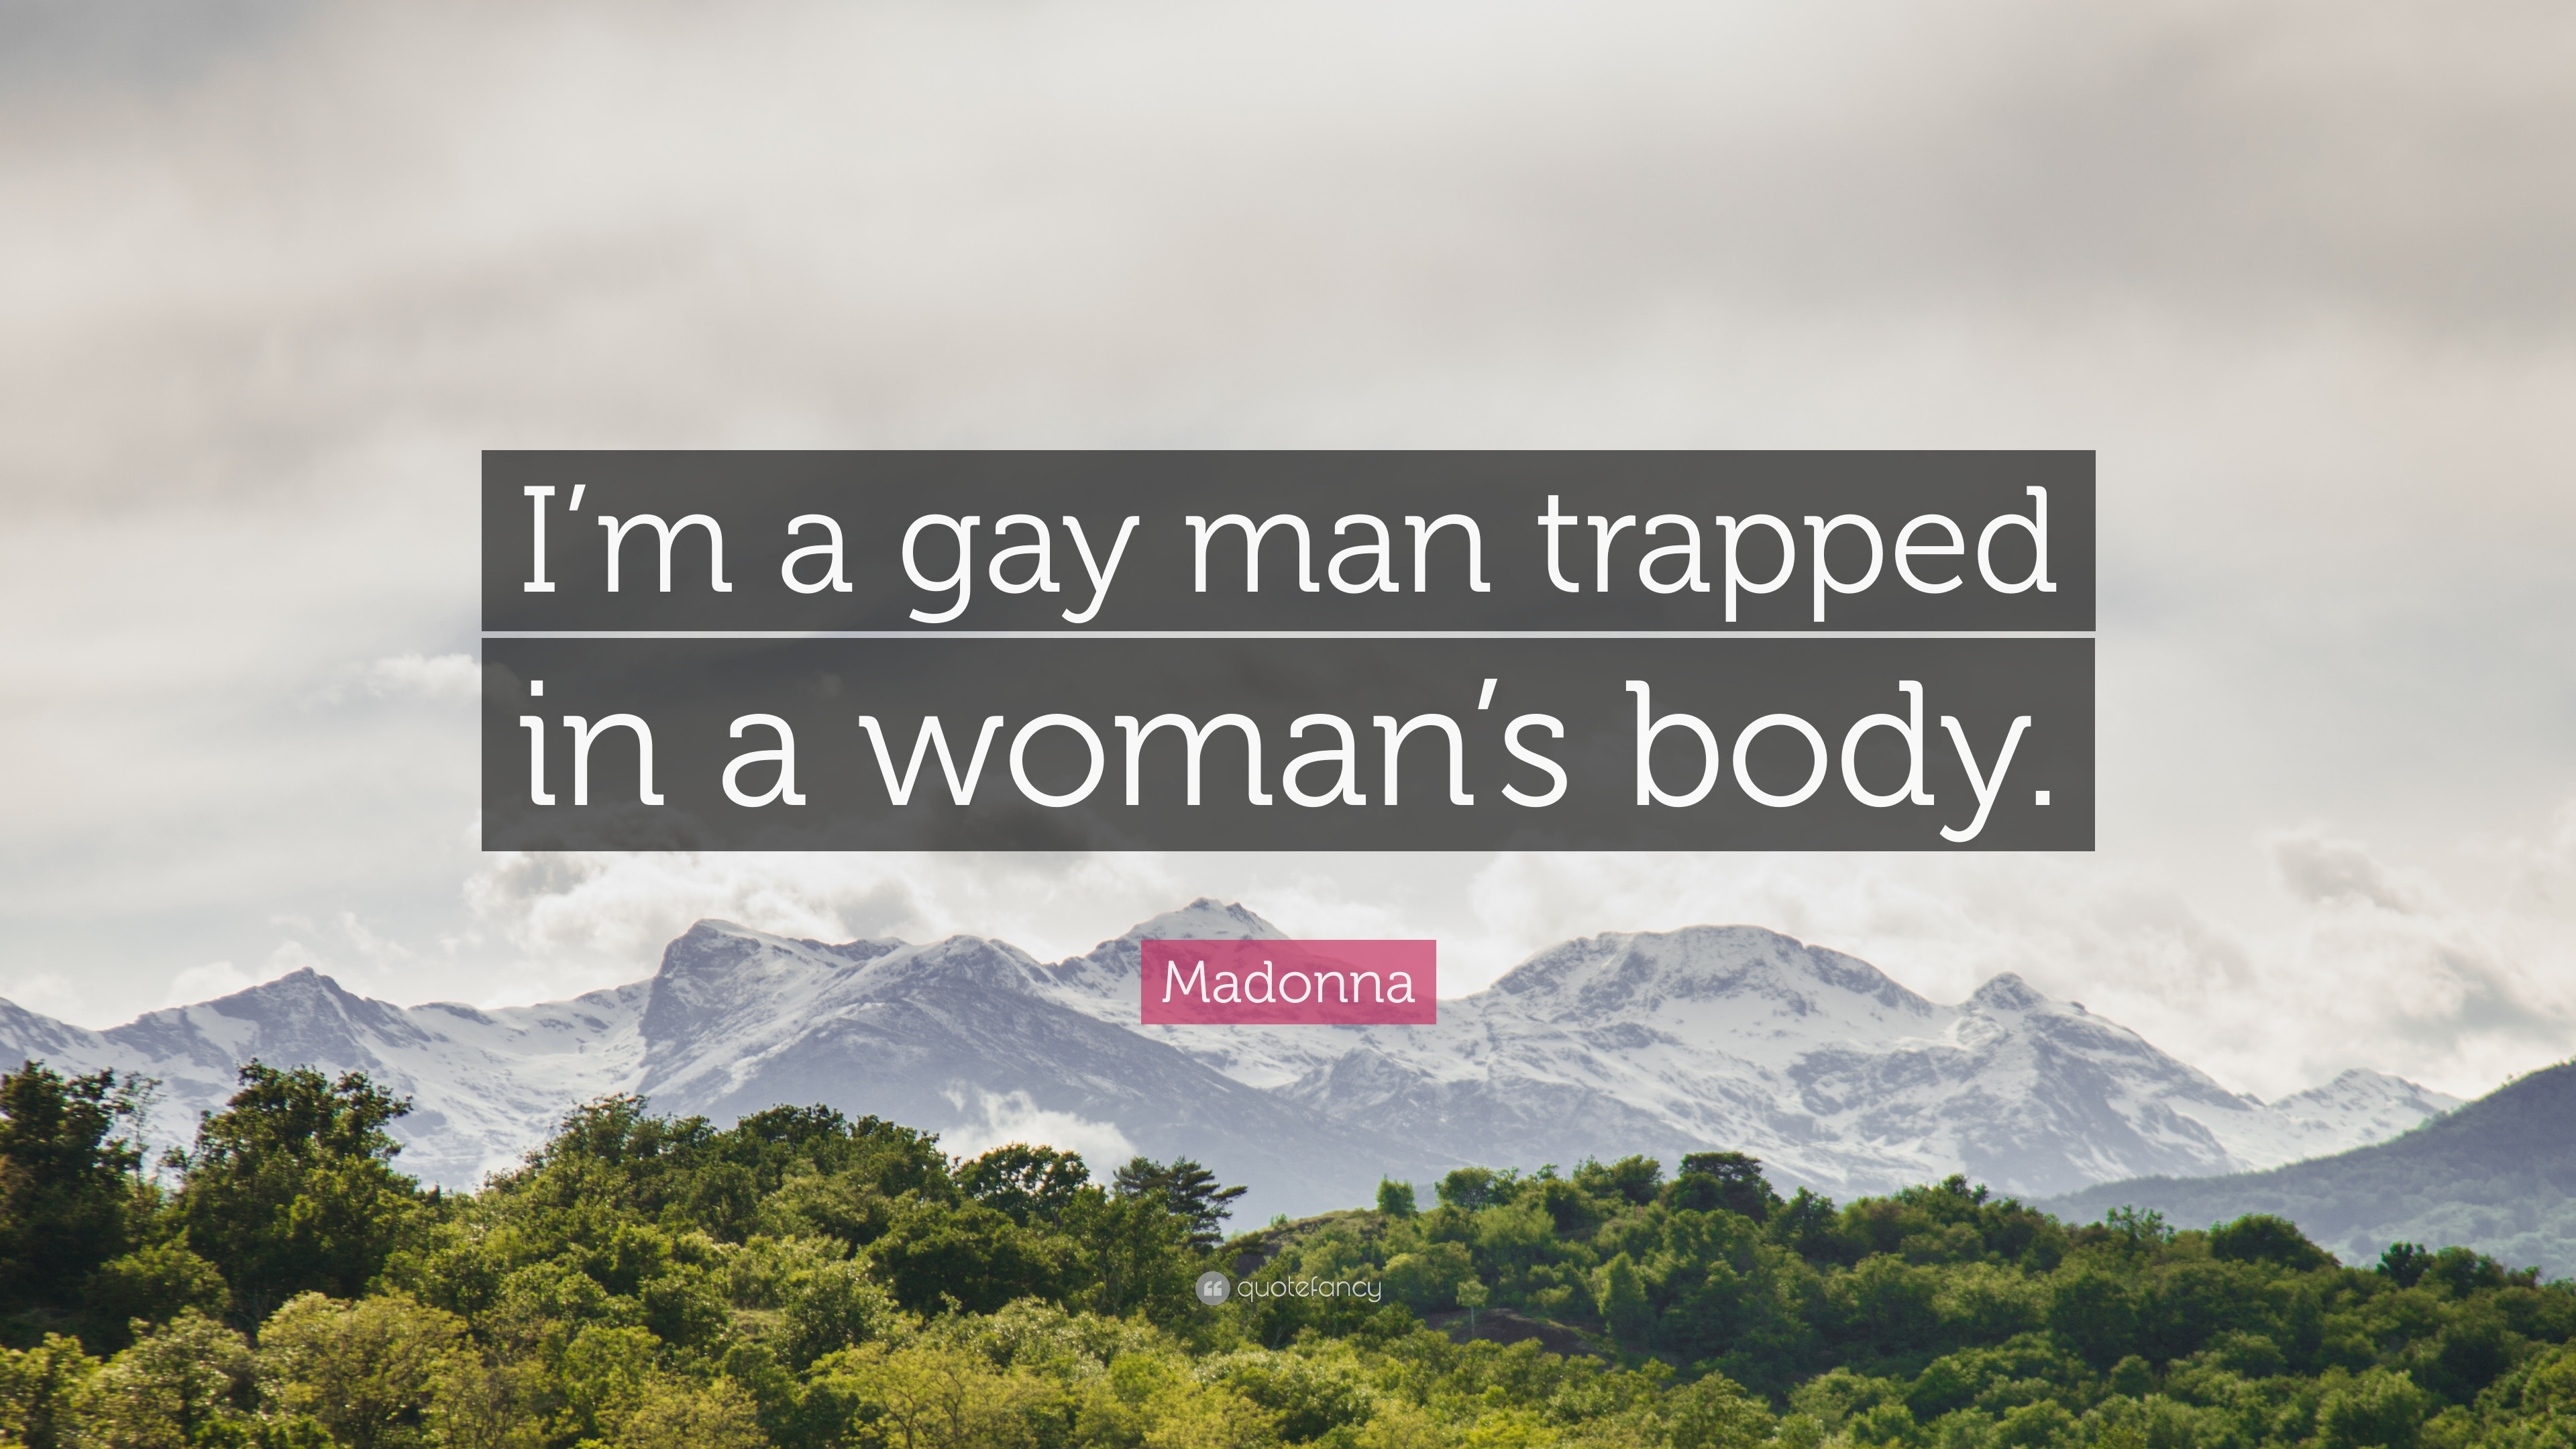 Madonna Quote: “I'm a gay man trapped in a woman's body.”